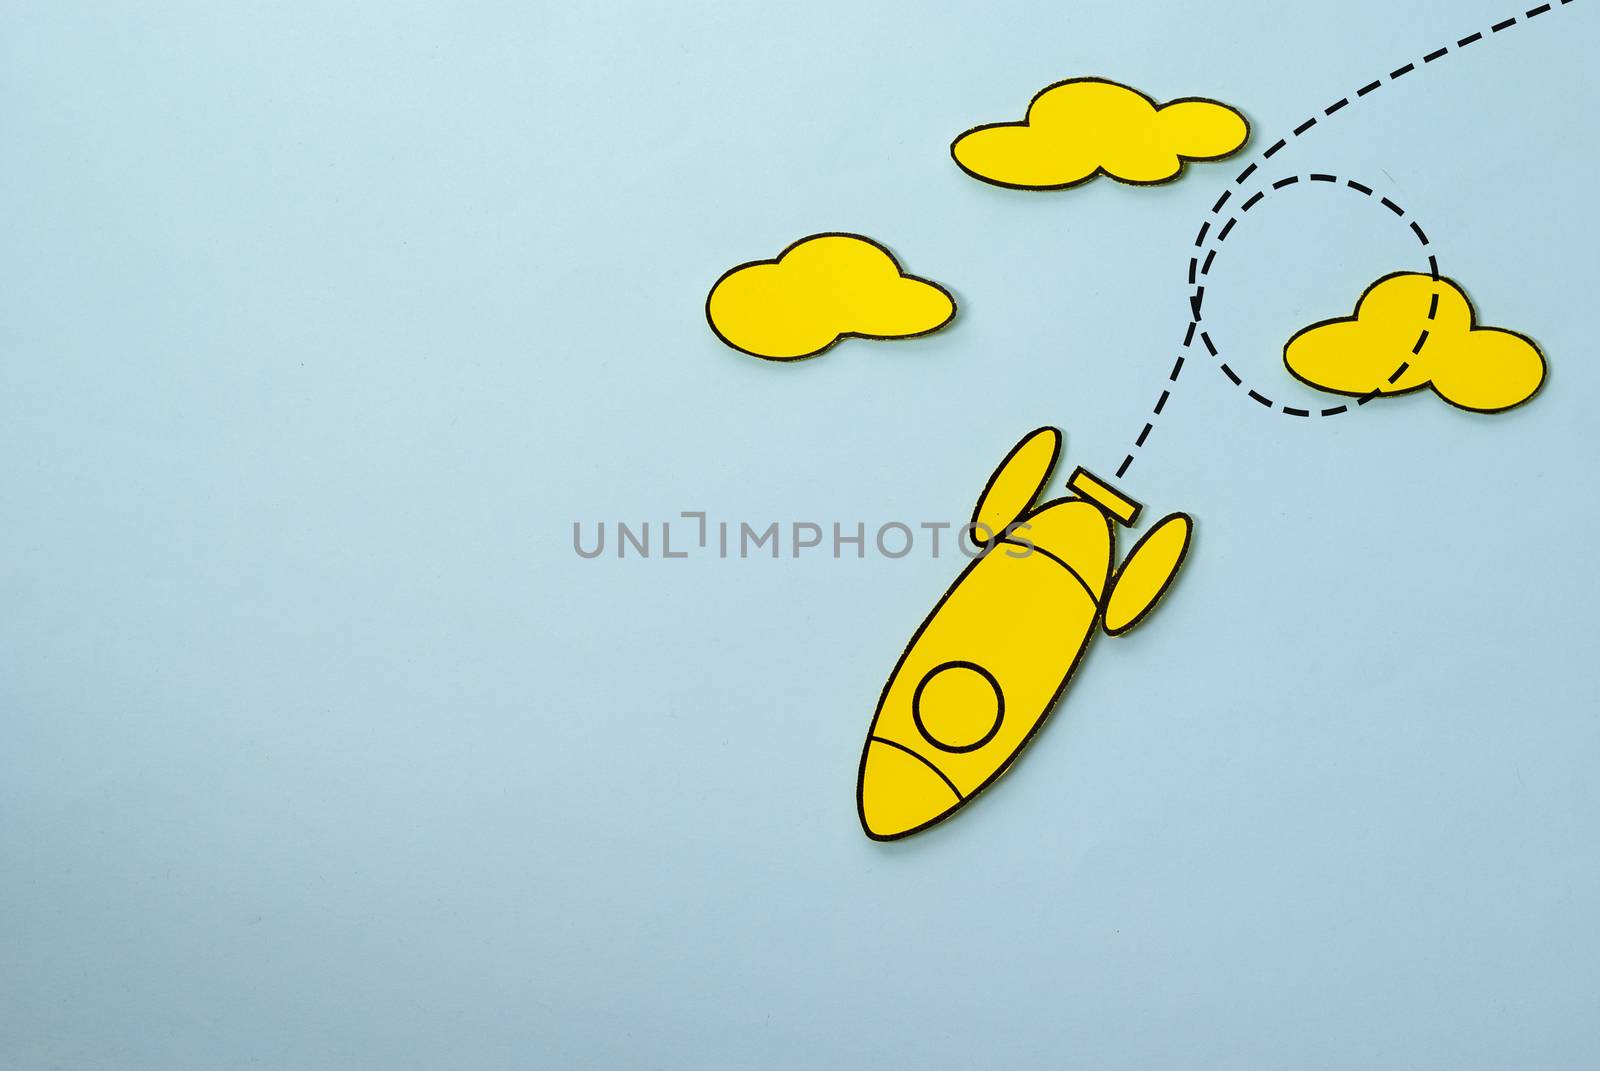 Yellow rocket looping around the clouds in the sky over a blue background with copy space in a conceptual image